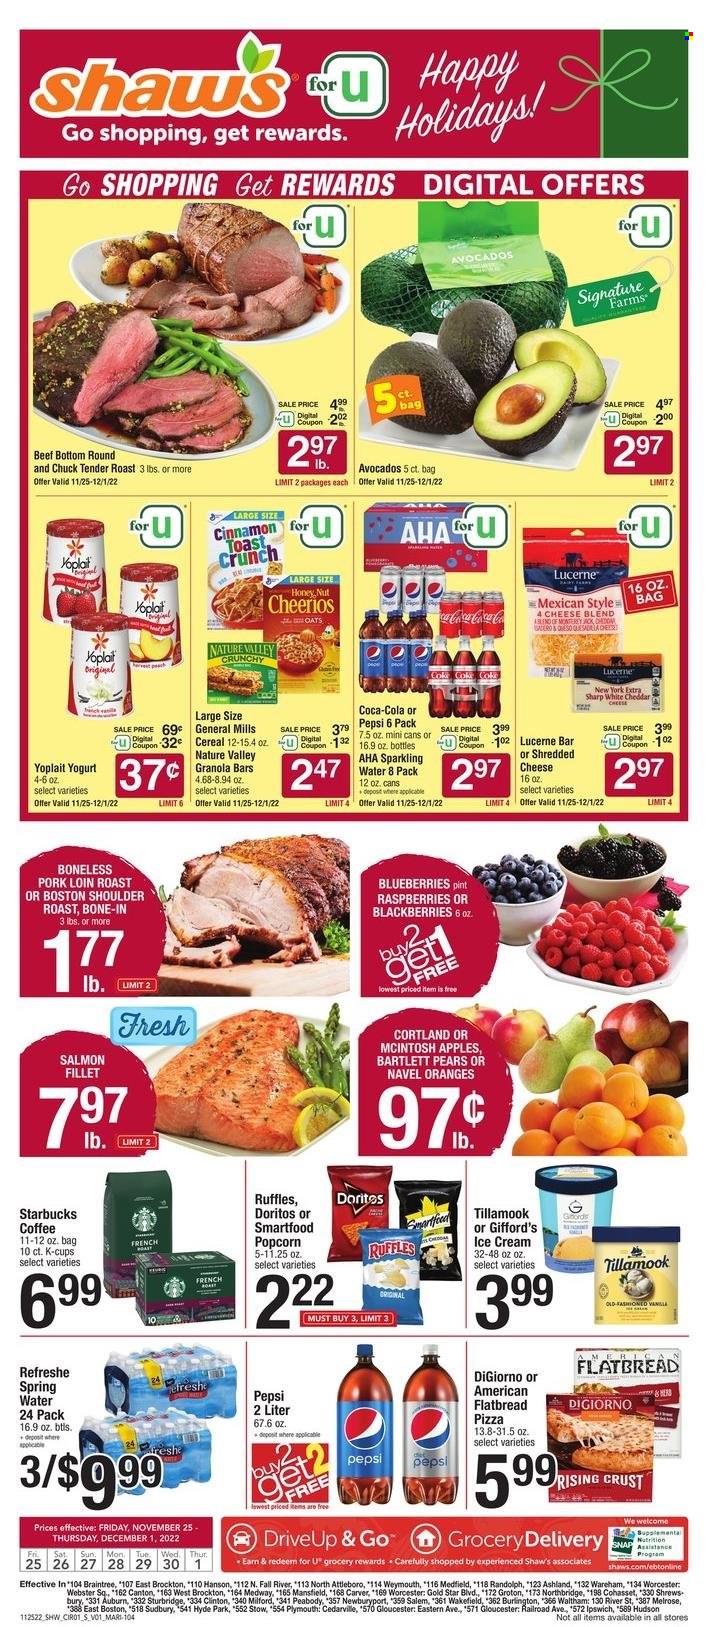 thumbnail - Shaw’s Flyer - 11/25/2022 - 12/01/2022 - Sales products - avocado, Bartlett pears, blackberries, blueberries, raspberries, oranges, fish fillets, salmon, salmon fillet, pizza, shredded cheese, cheese, Yoplait, snack bar, ice cream, General Mills, breakfast bar, Doritos, Smartfood, popcorn, Ruffles, salty snack, Cheerios, granola bar, Nature Valley, cinnamon, Coca-Cola, Pepsi, soft drink, Coke, spring water, sparkling water, water, carbonated soft drink, Starbucks, coffee capsules, K-Cups, chuck tender, pork loin, pork meat, navel oranges. Page 1.